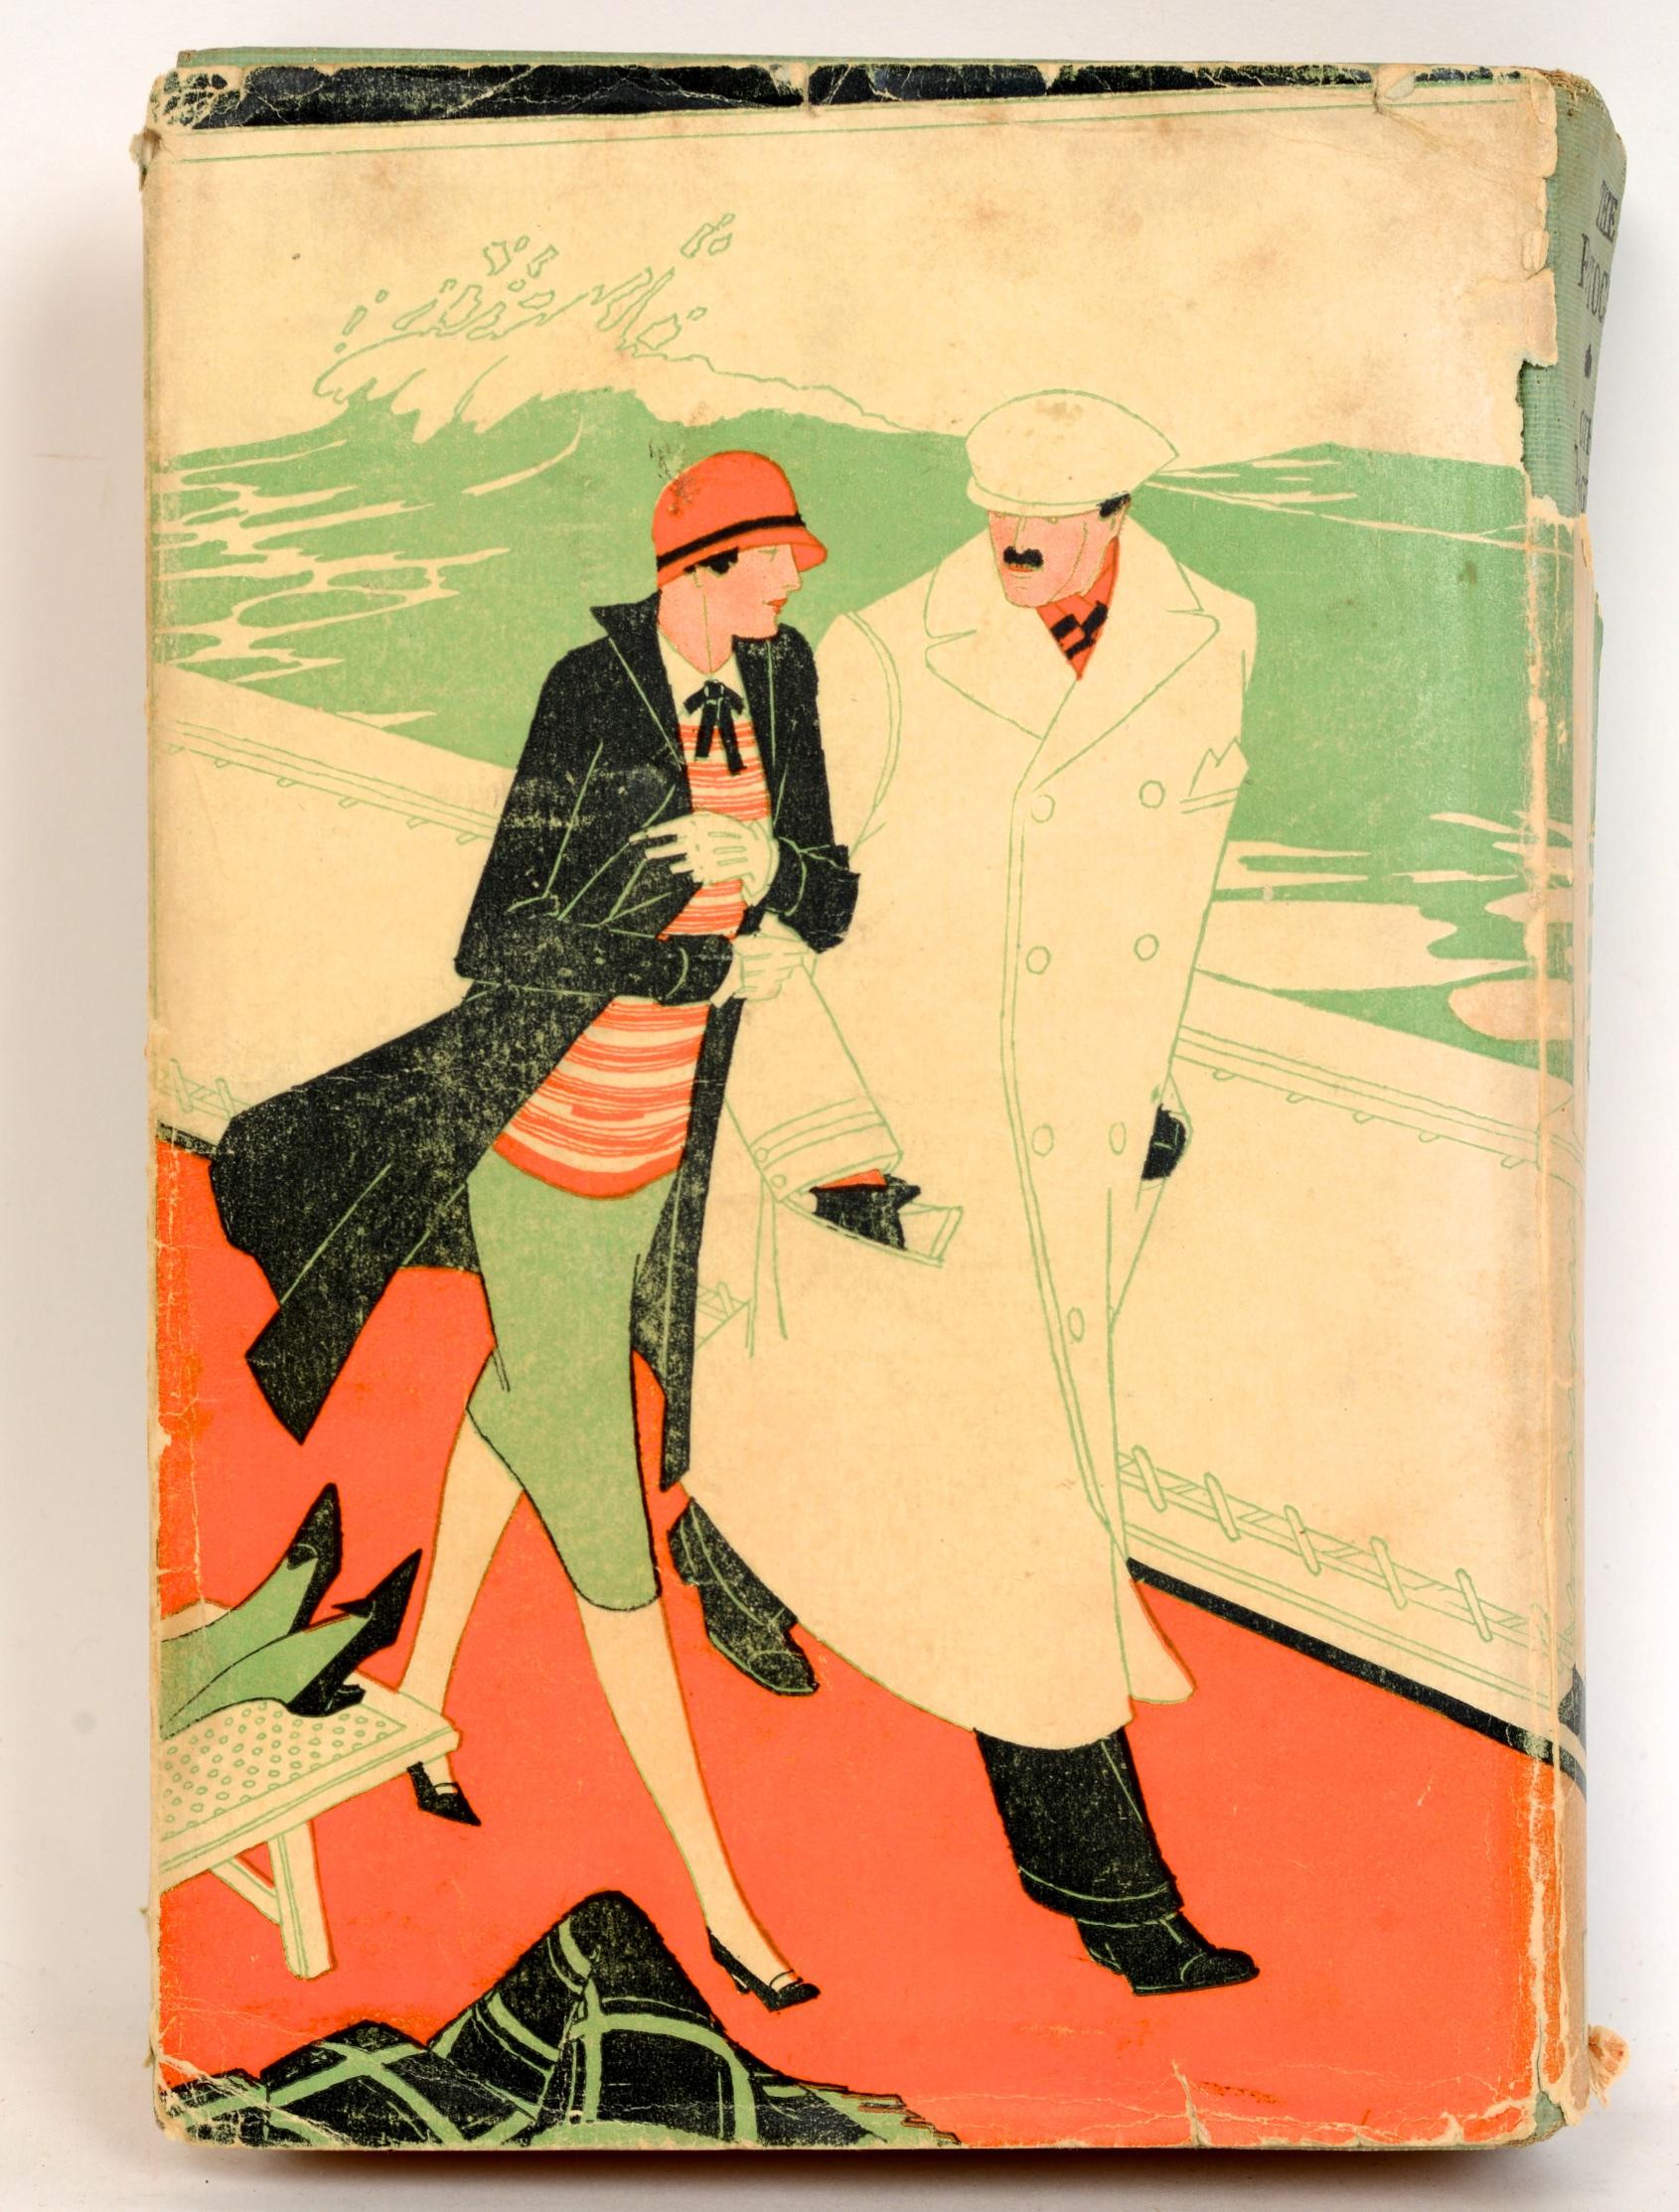 The Plutocrat by Booth Tarkington. Doubleday, Page and Co. Garden City, New York 1927. First Edition hardcover with dust jacket. The adventurous romance of an American millionaire. A young man falls in love with a mysterious French aristocrat,